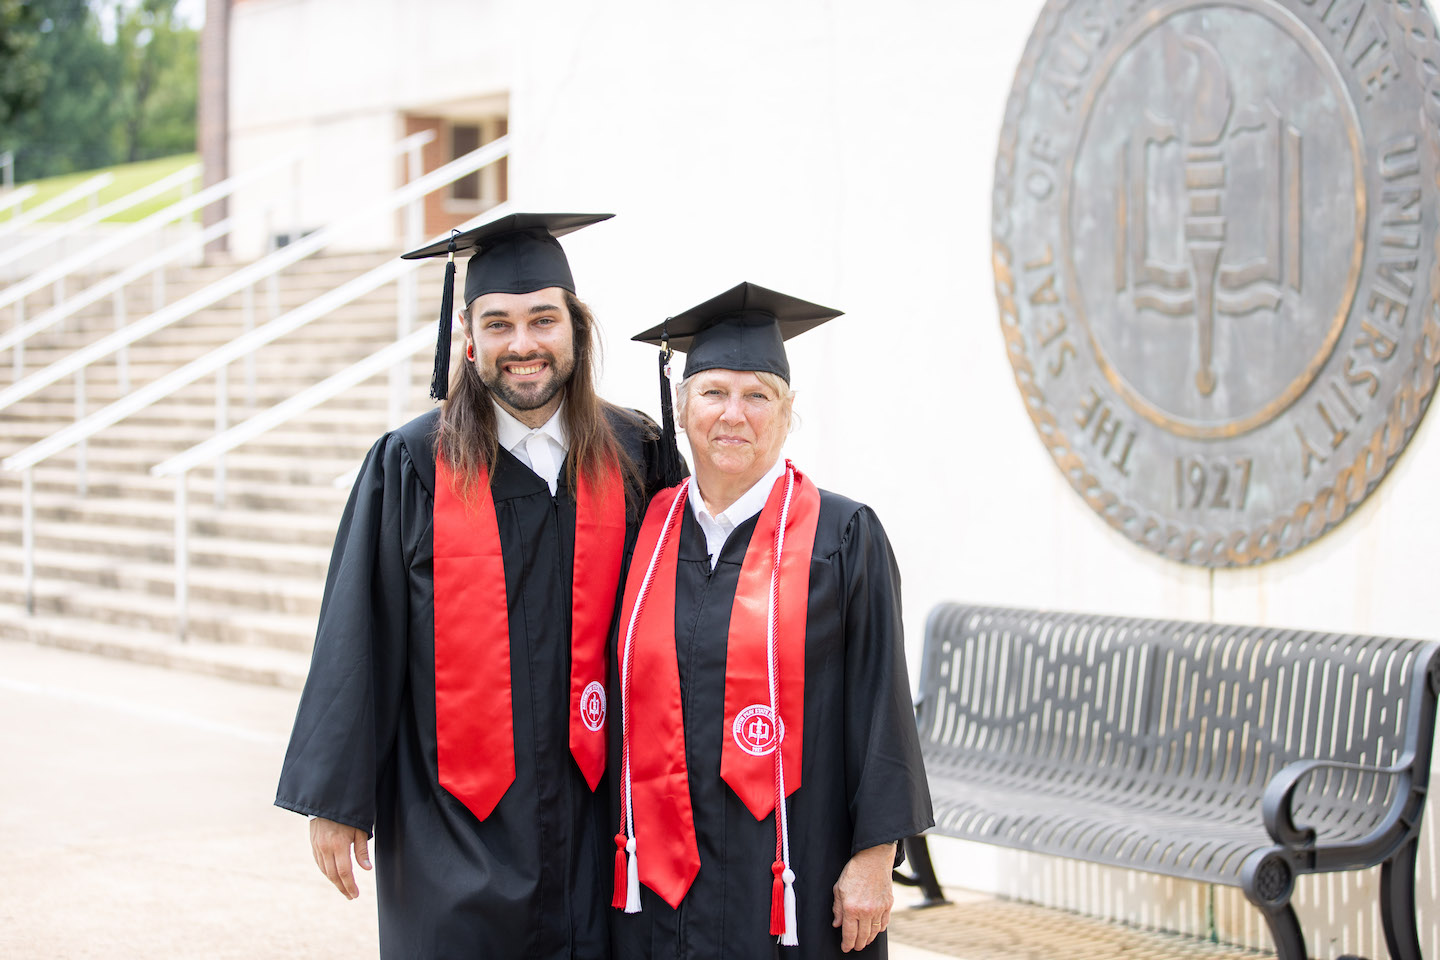 Grandmother, grandson walk together across Austin Peay State University’s commencement stage